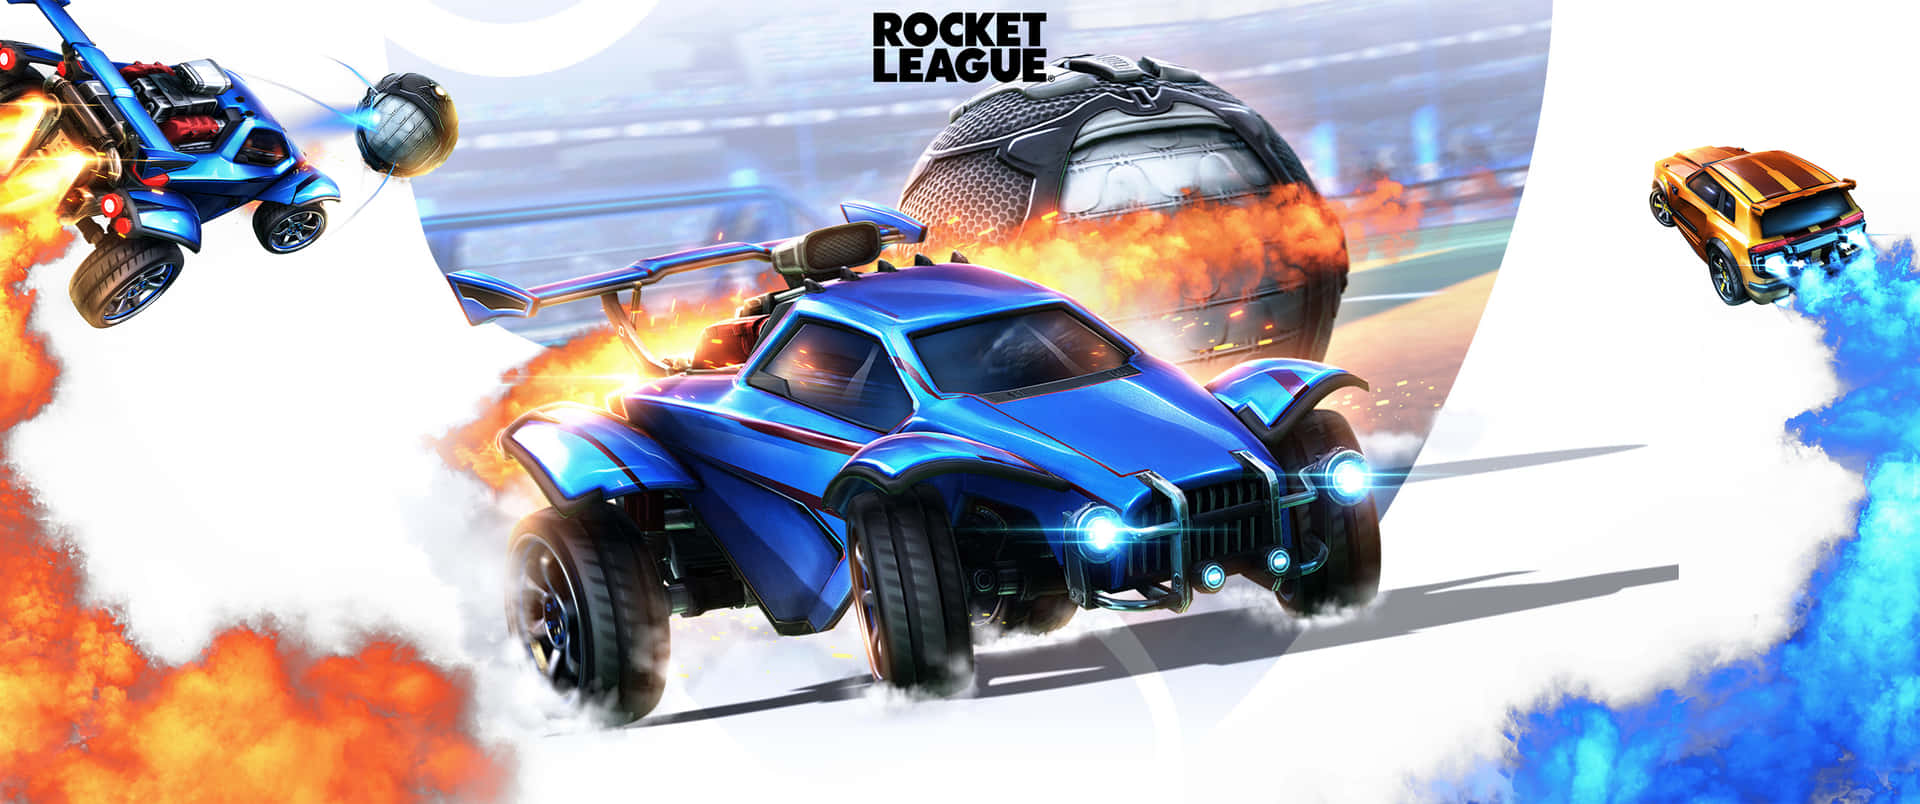 "Go for Glory and Get your Rocket League Victory!"